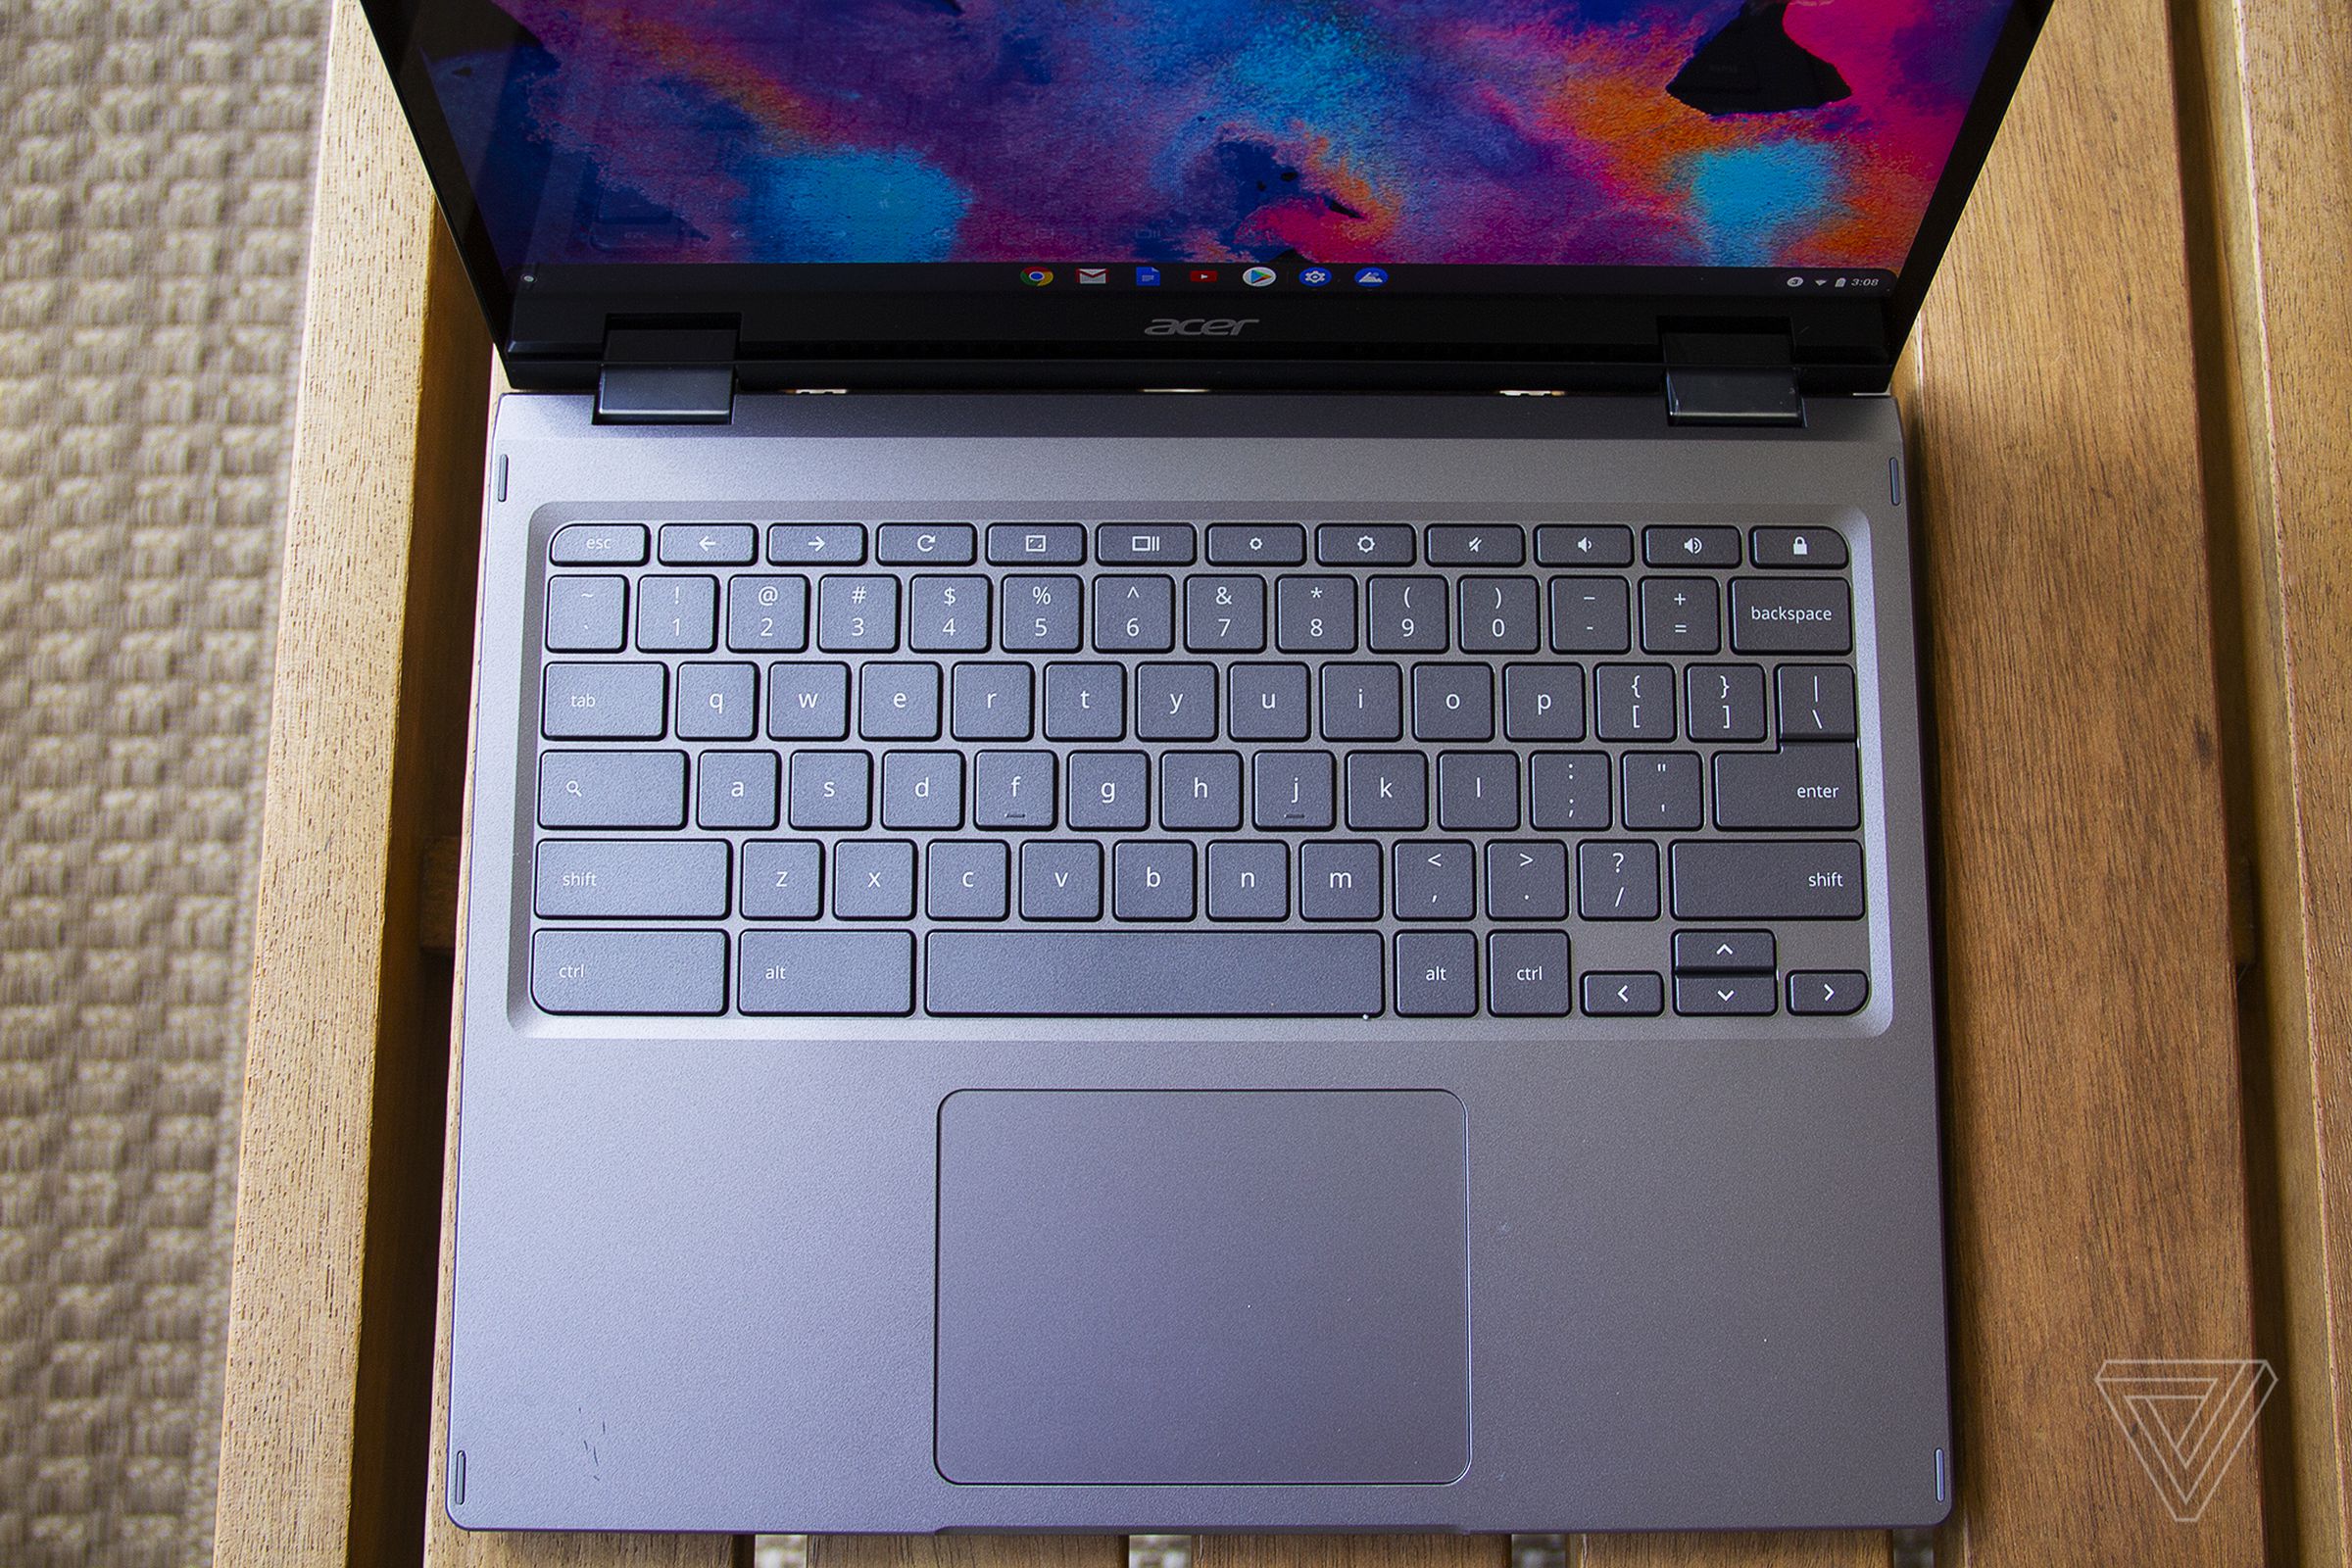 The Acer Chromebook Spin 713’s keyboard from above.